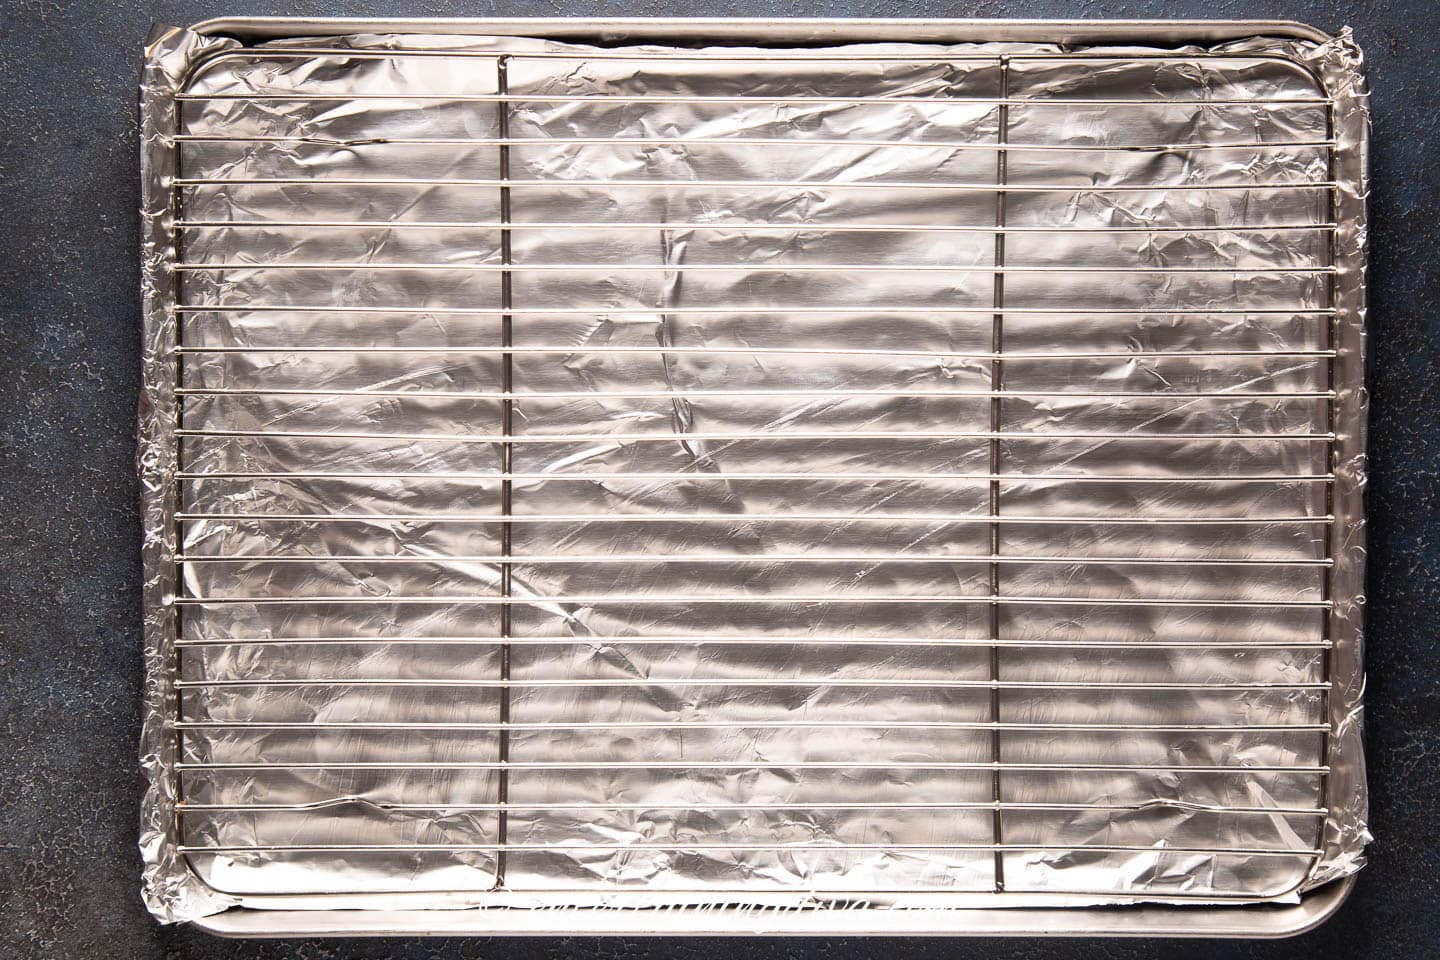 baking sheet lined with foil and a wire rack